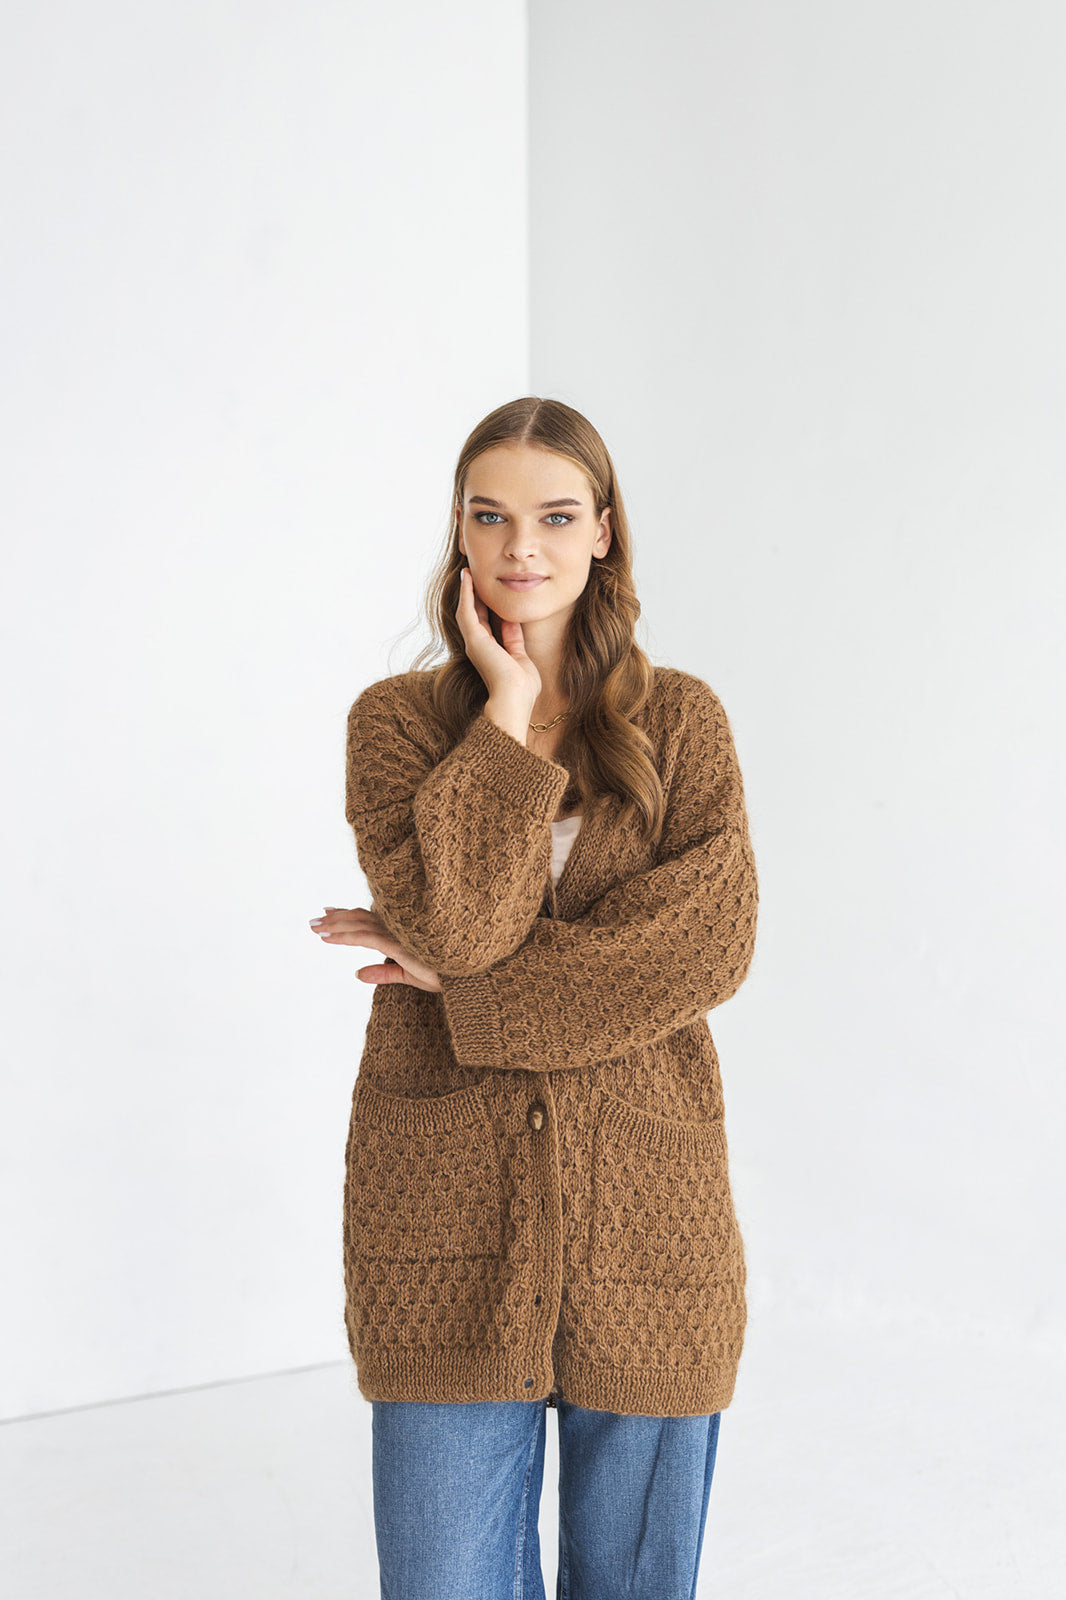 Long camel brown mohair cardigan with pockets, taupe fluffy cable knit alpaca blend sweater with buttons, thick fuzzy chunky knitted jacket